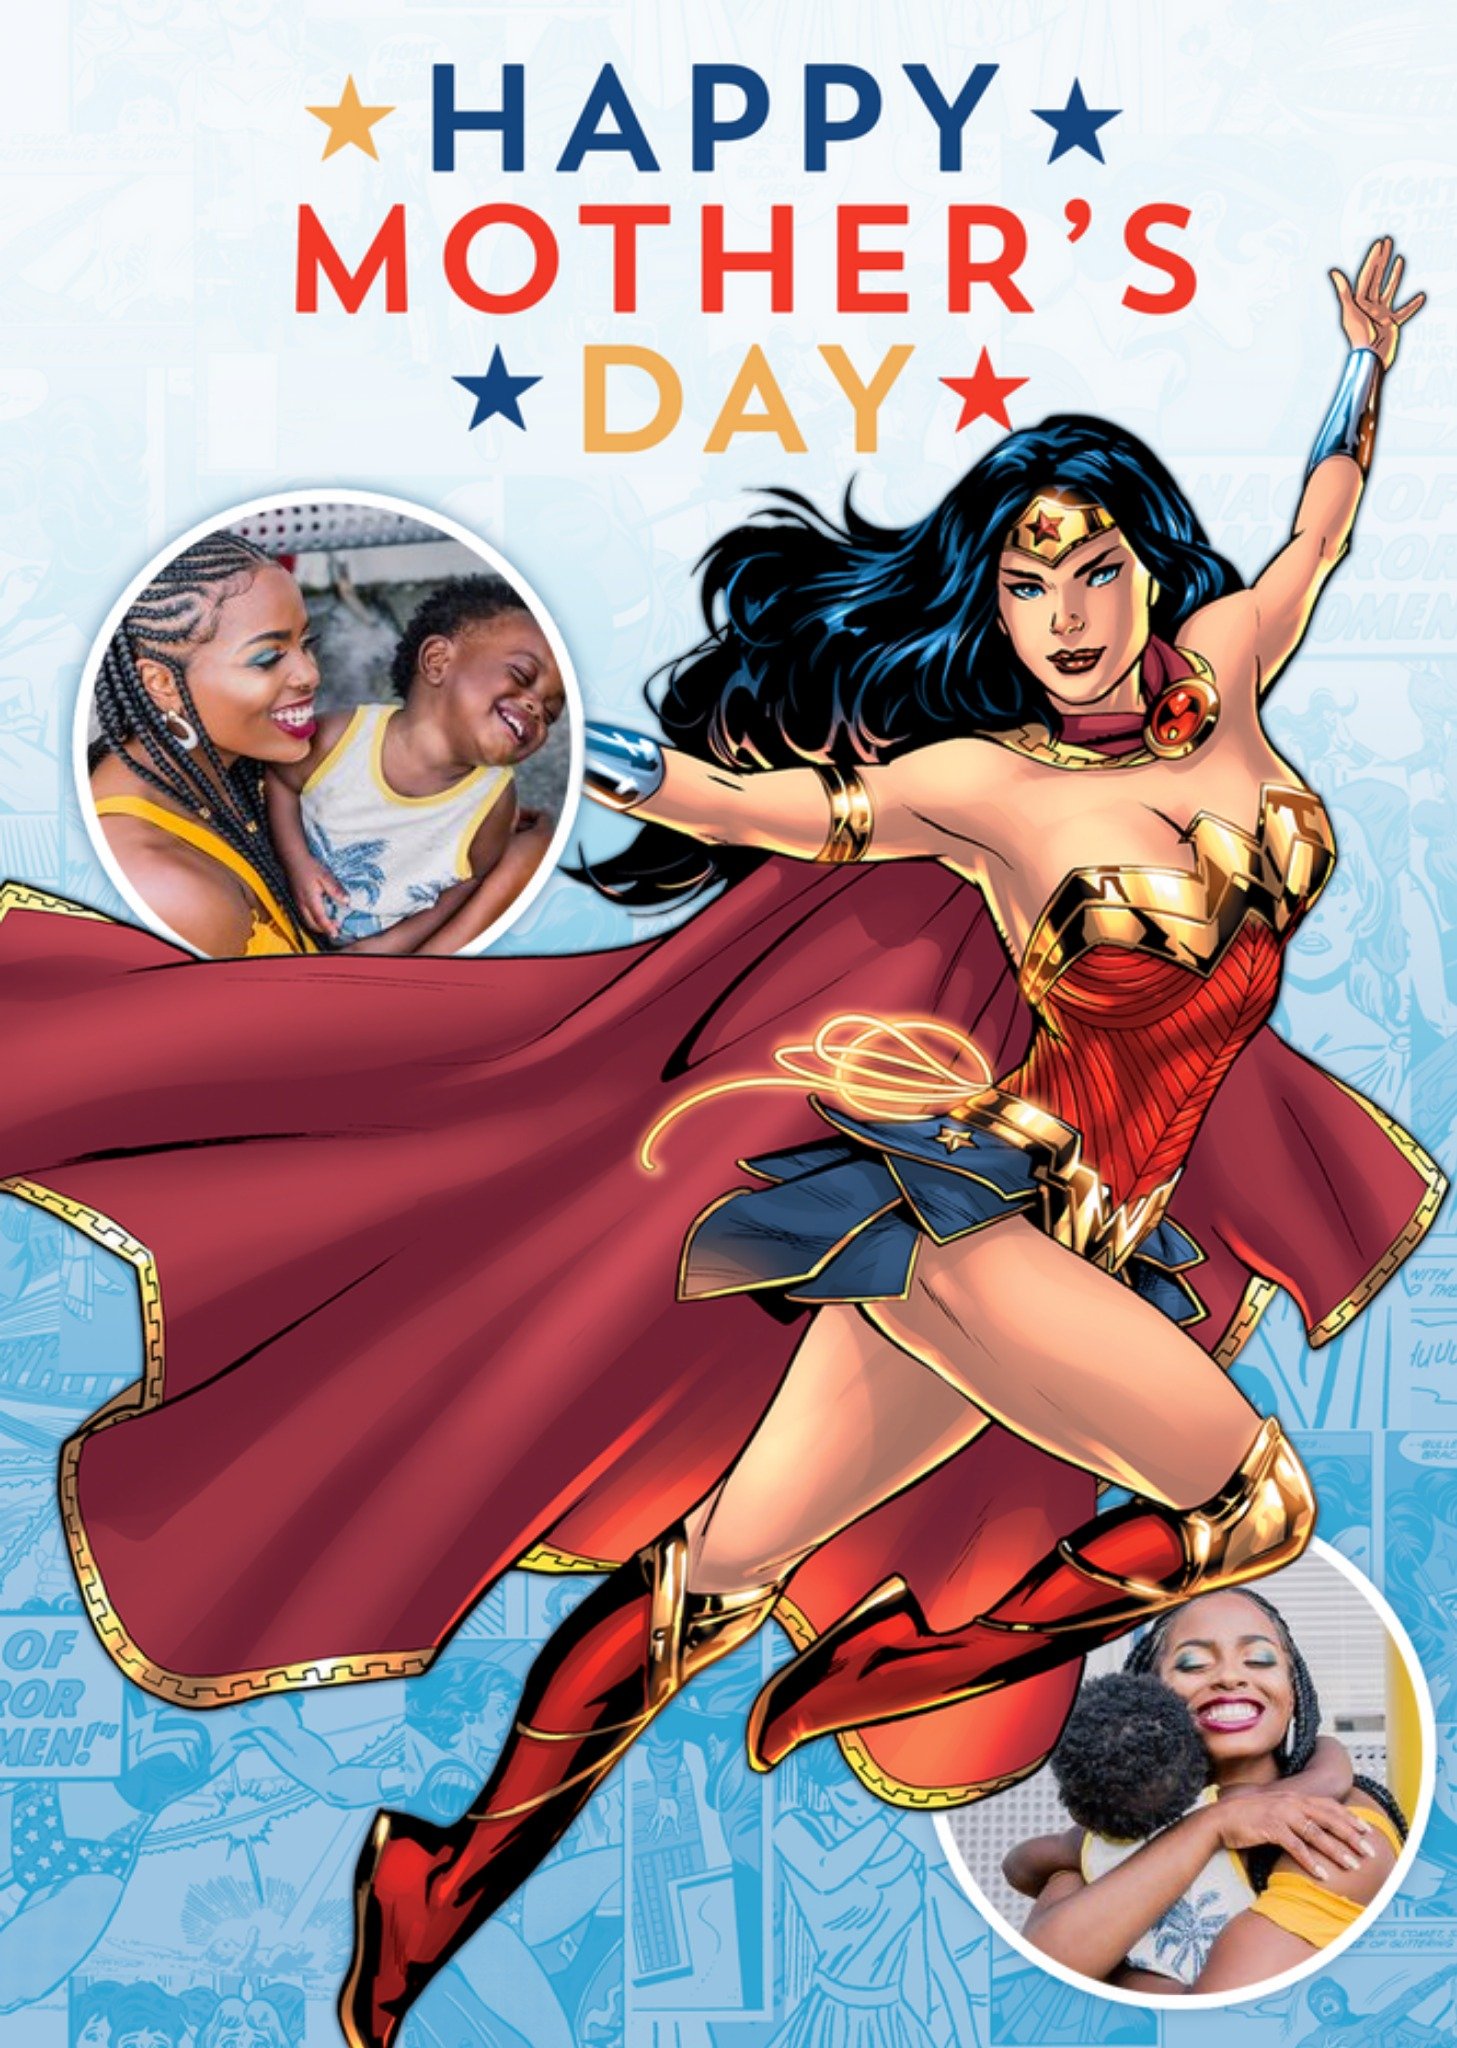 Moonpig Wonder Woman Happy Mother's Day Photo Upload Card, Large